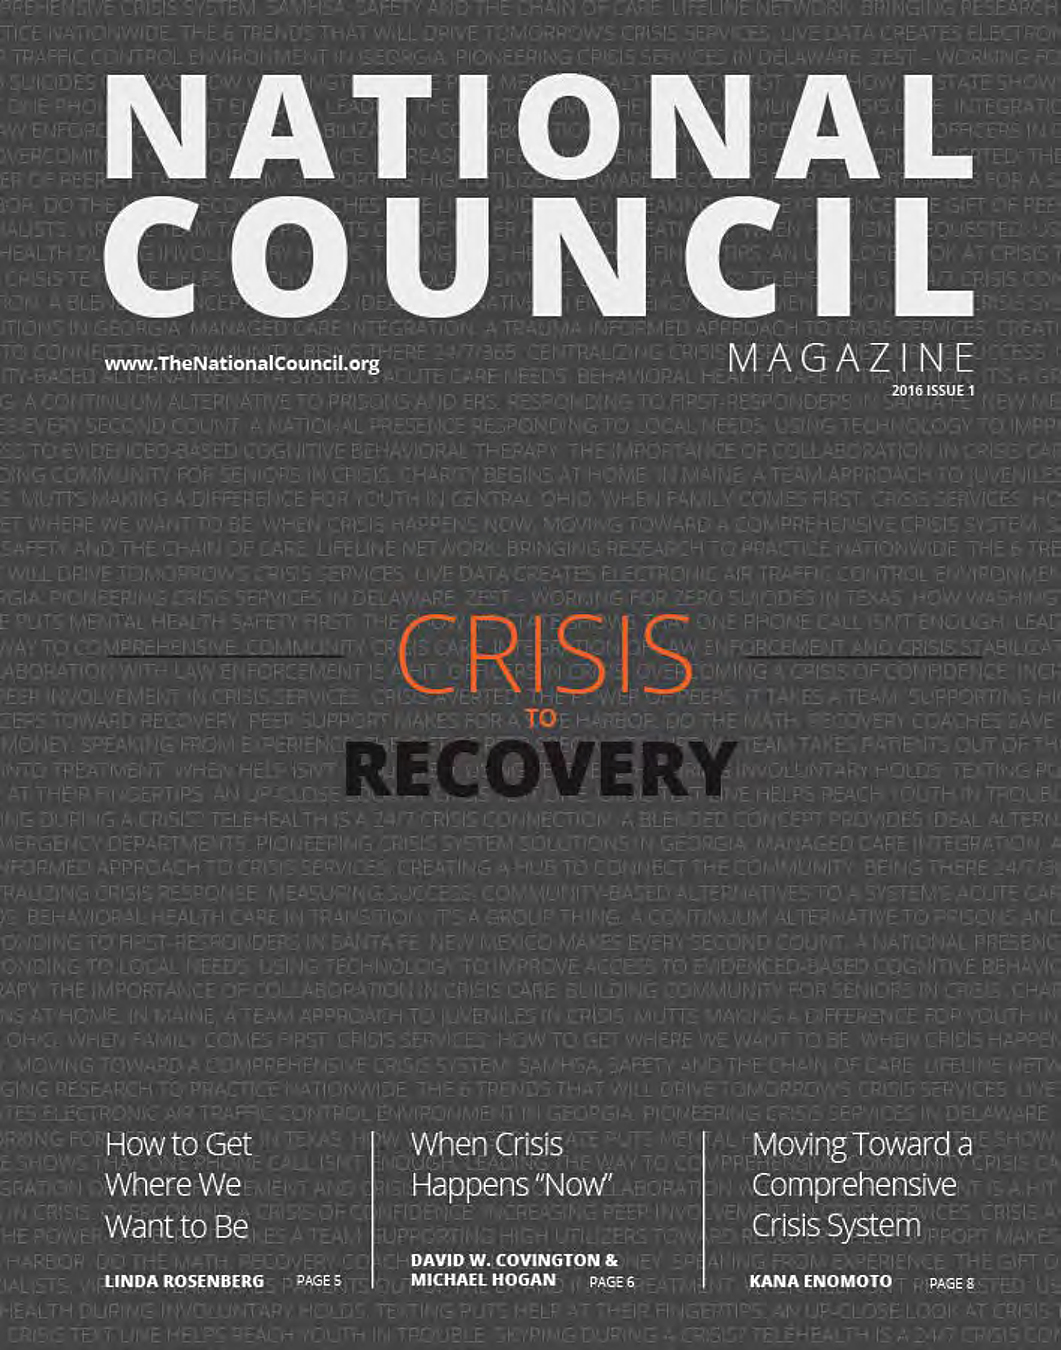 National Council for Behavioral Health magazine